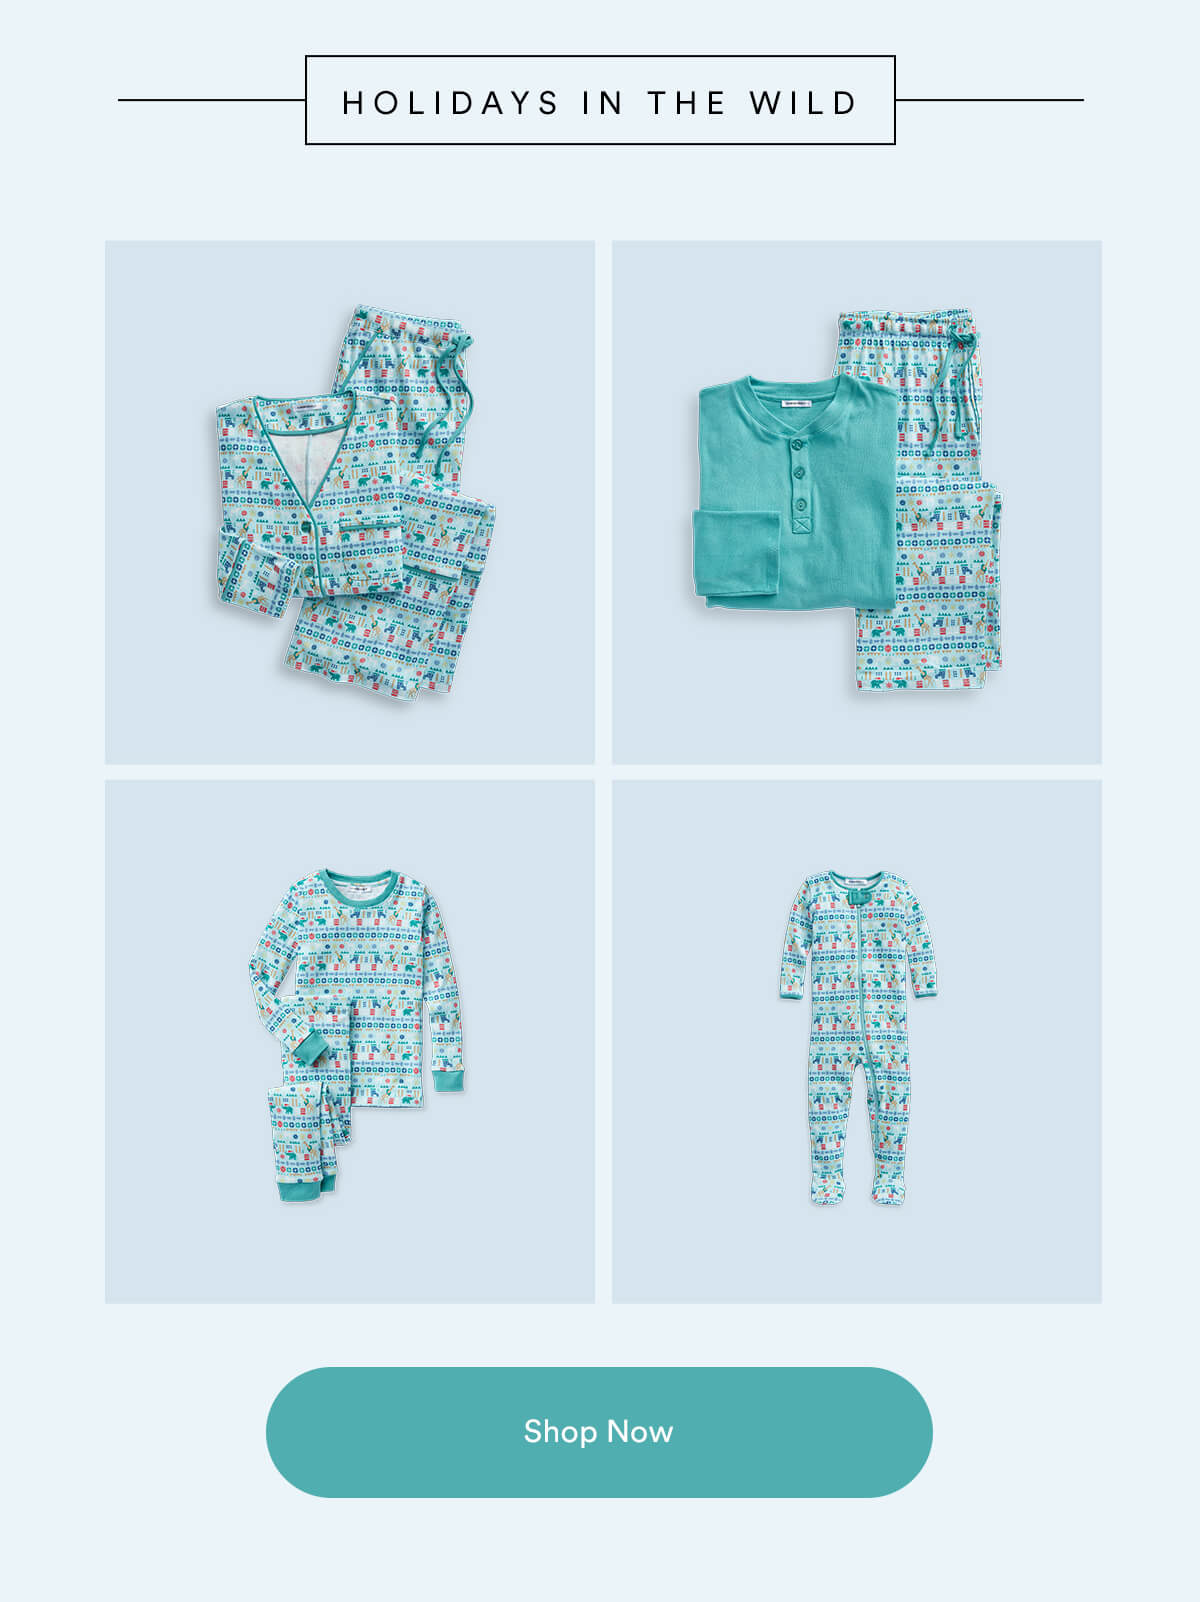 Holidays in the wild. Four image grid with Holiday Family Pajamas in Live in the Holidays in the wild print.